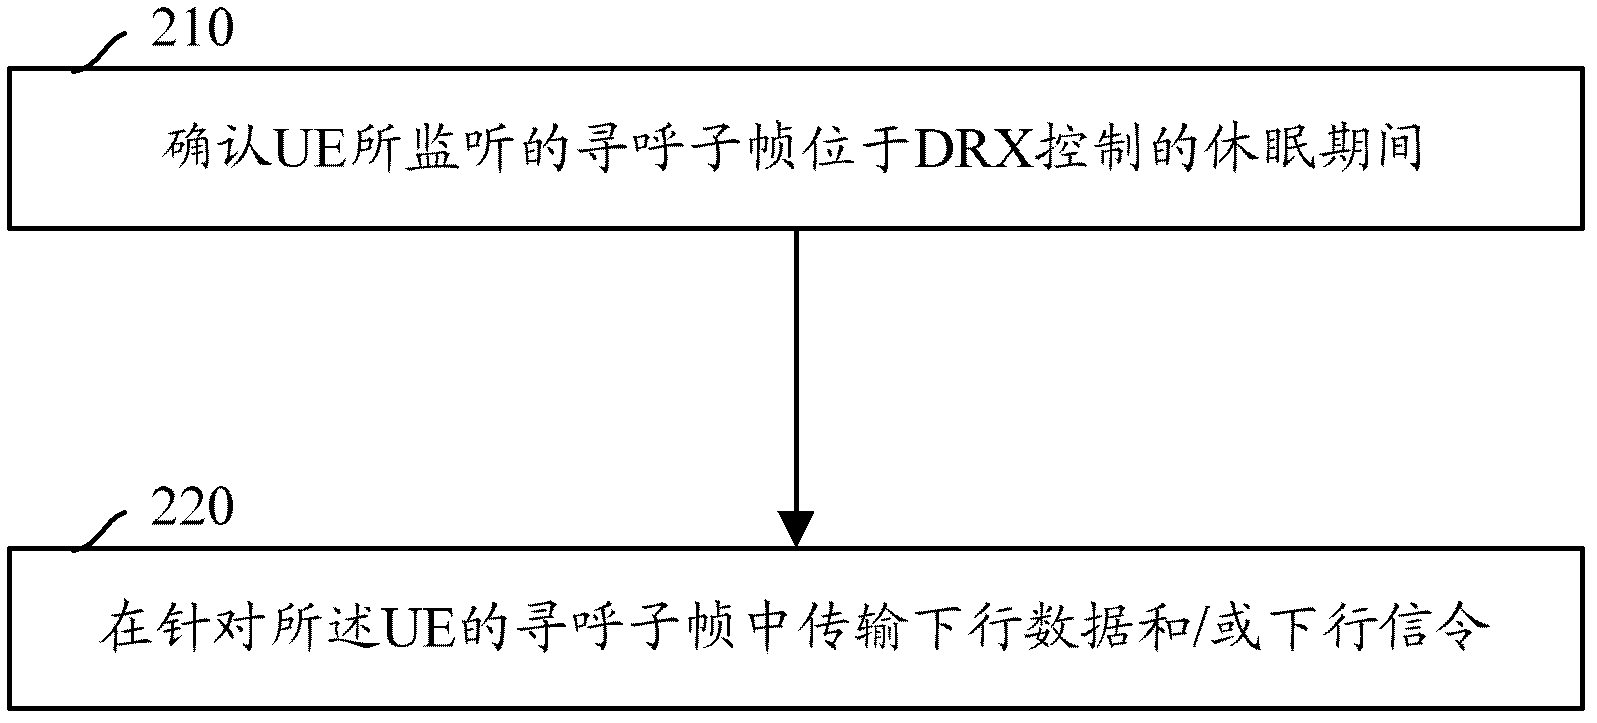 Method and system for implementing DRX (Discontinuous Reception)